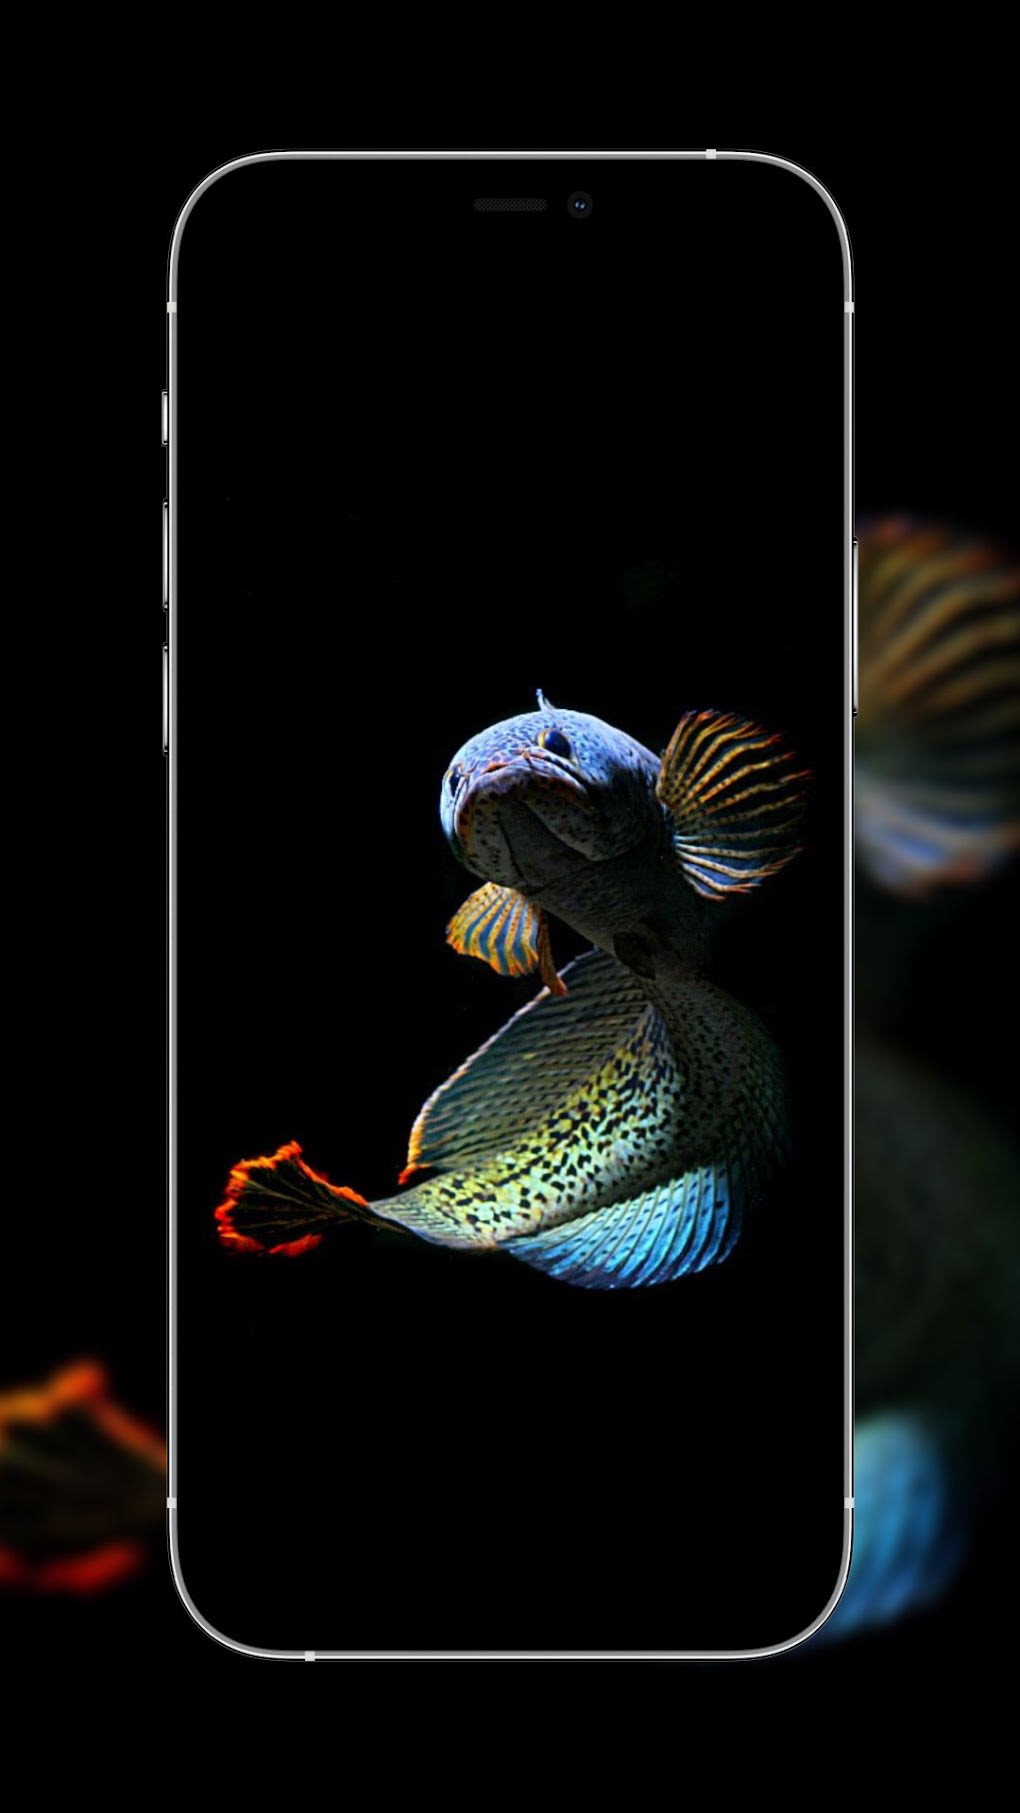 Channa Fish Wallpapers for Android - Download